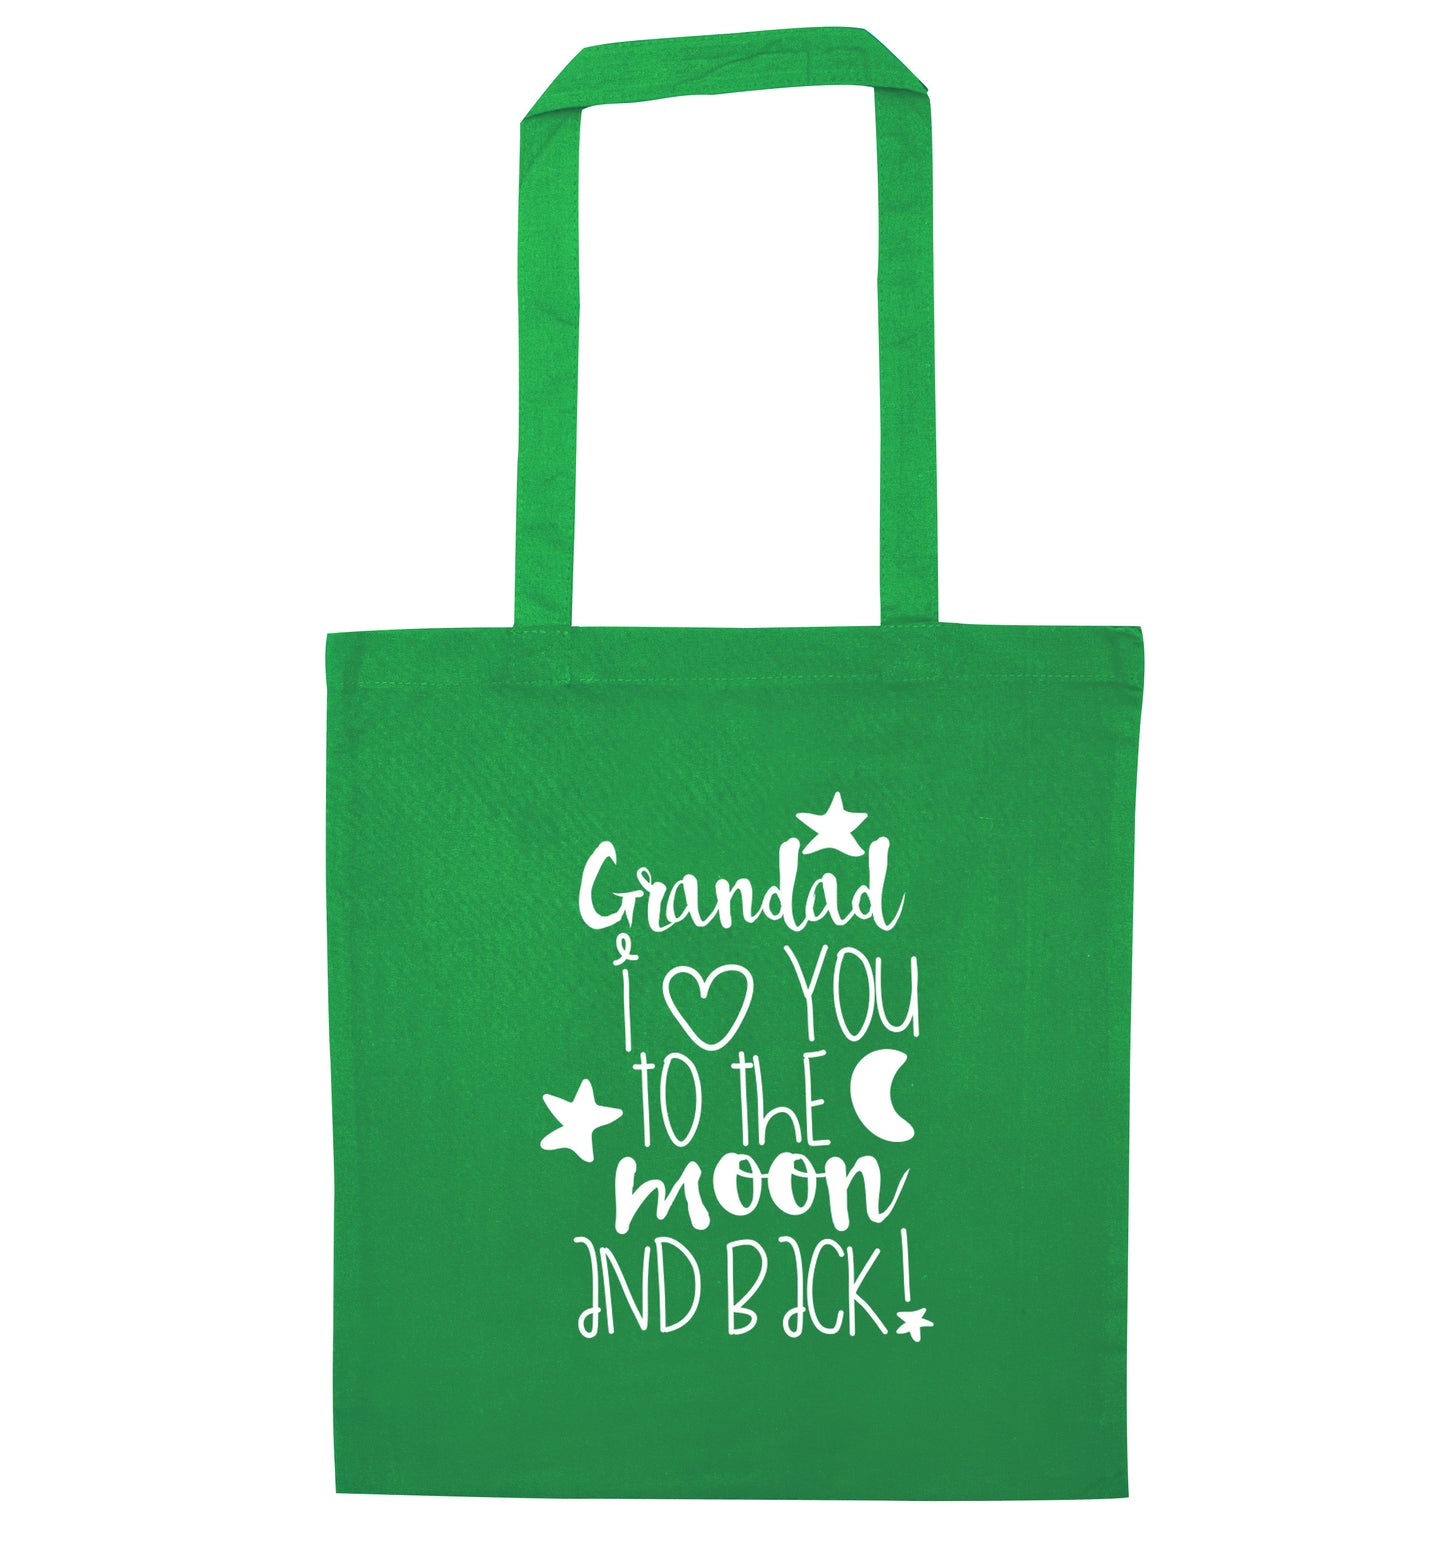 Grandad's I love you to the moon and back green tote bag